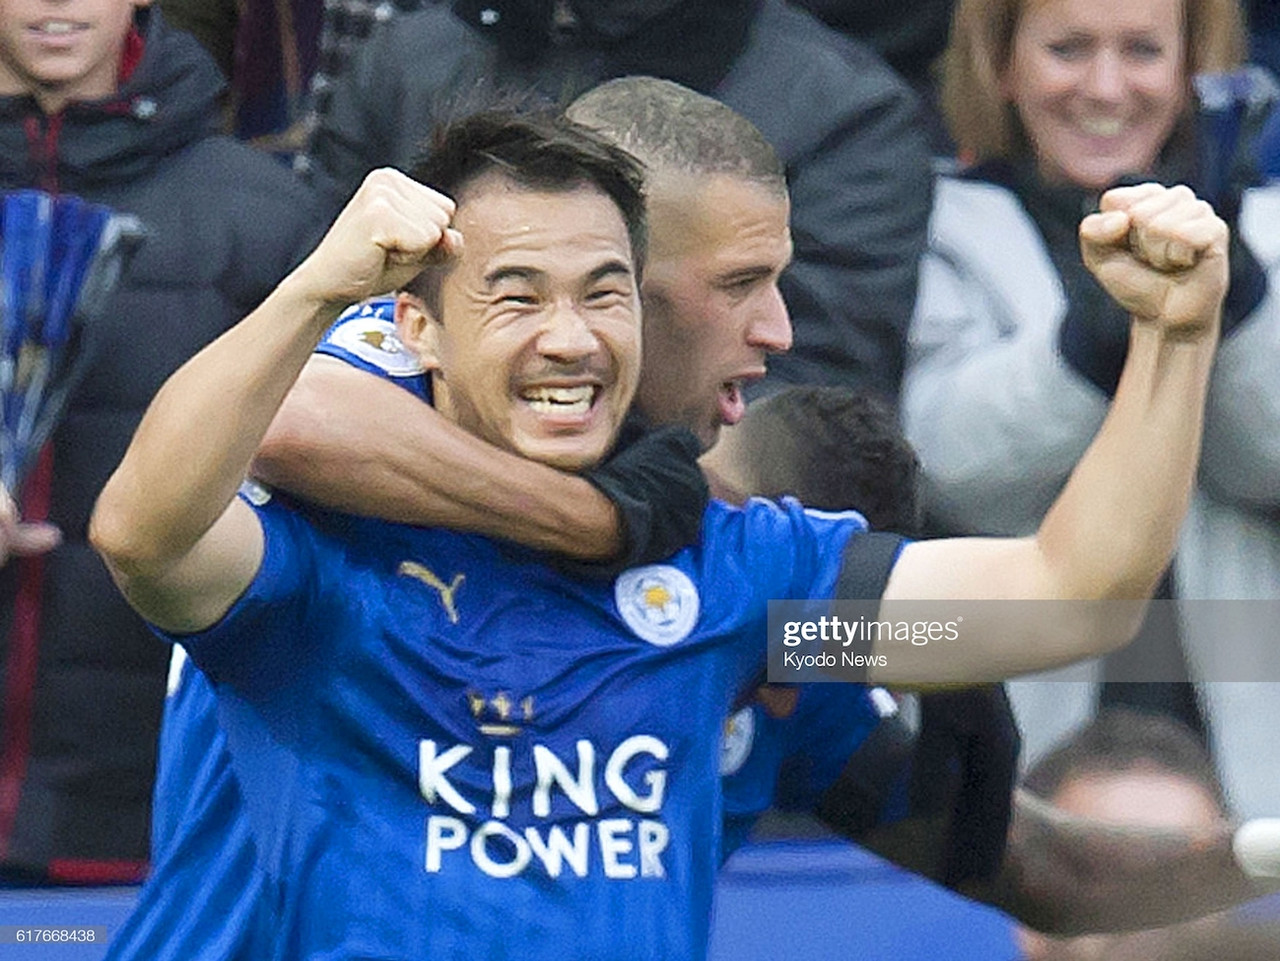 Memorable match: Leicester City 3-1 Crystal Palace: Foxes stretch unbeaten home run to 20 games